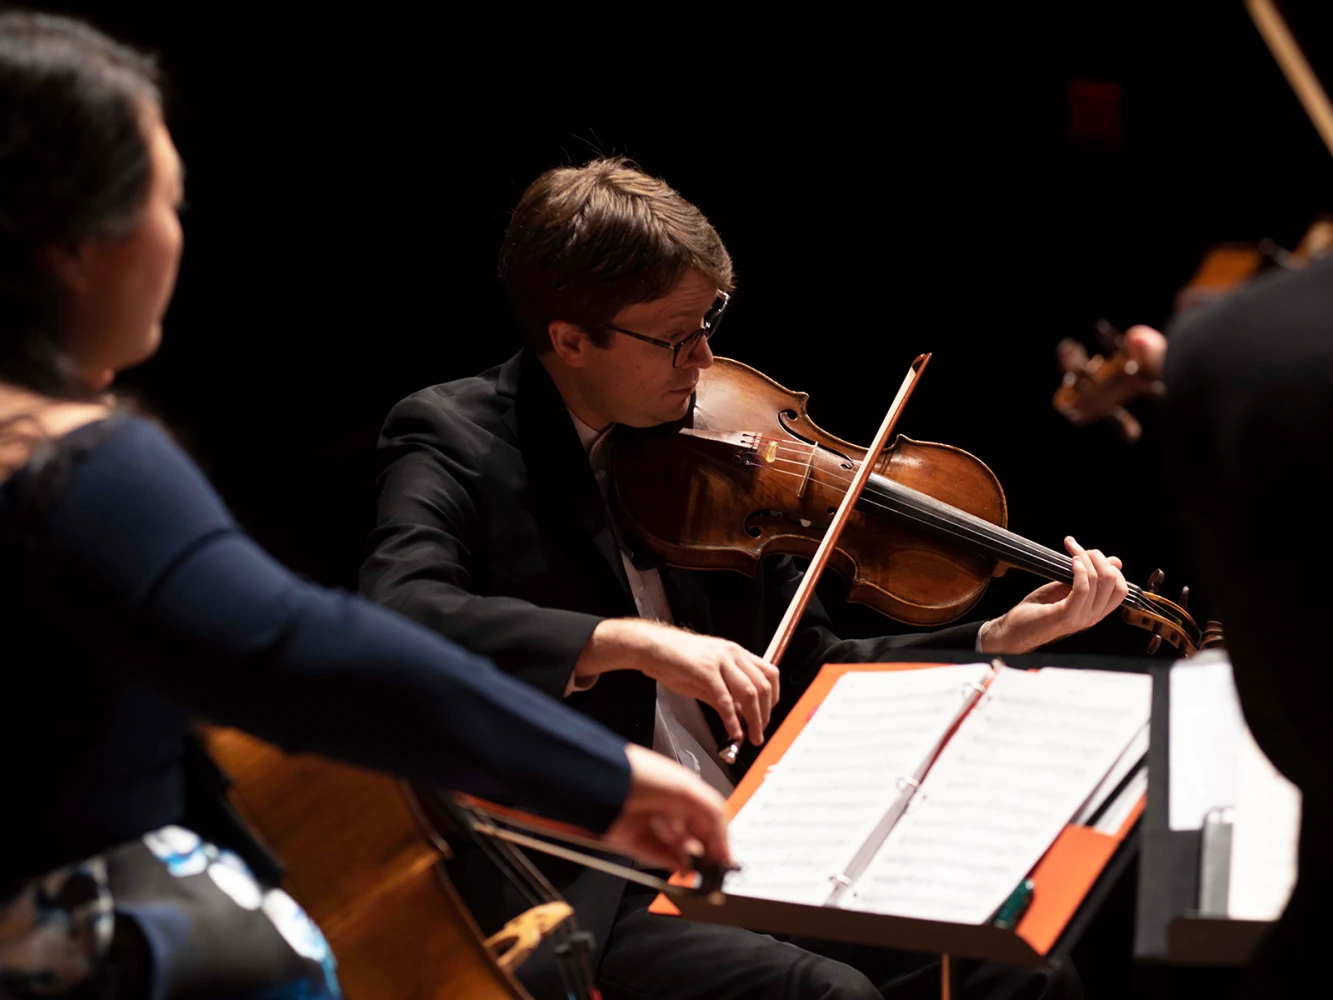 The Chamber Music Society of Lincoln Center: The Calidore String Quartet: What to expect - 6